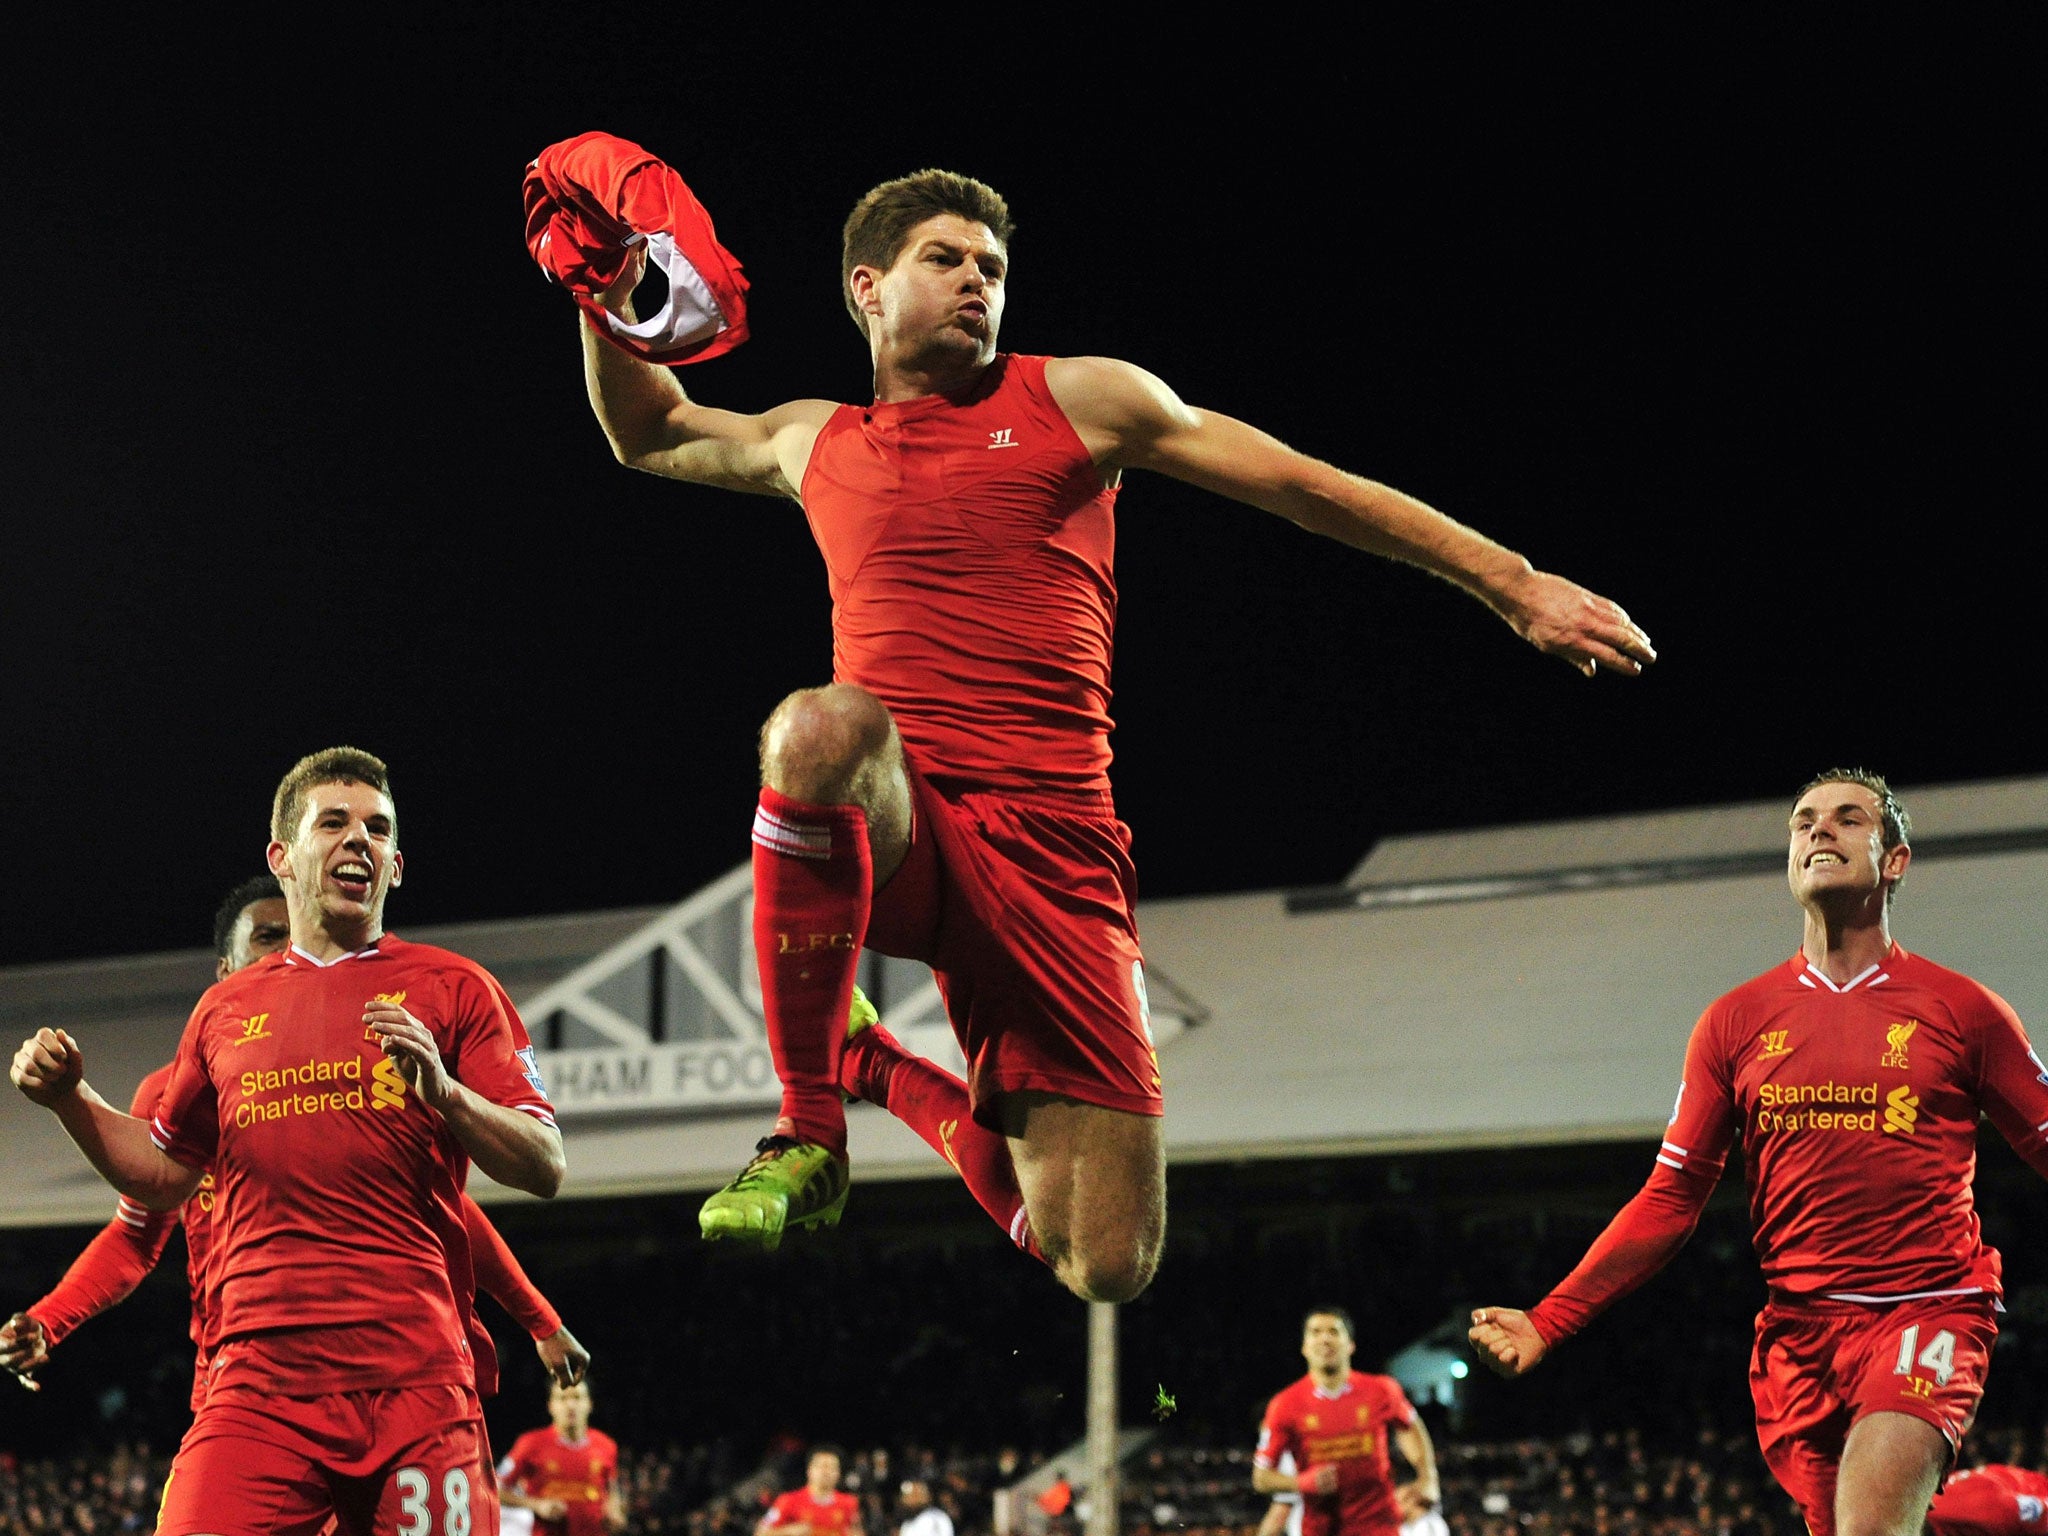 Liverpool's English midfielder Steven Gerrard (C) celebrates scoring their third goal during the English Premier League football match between Fulham and Liverpool at Craven Cottage in London